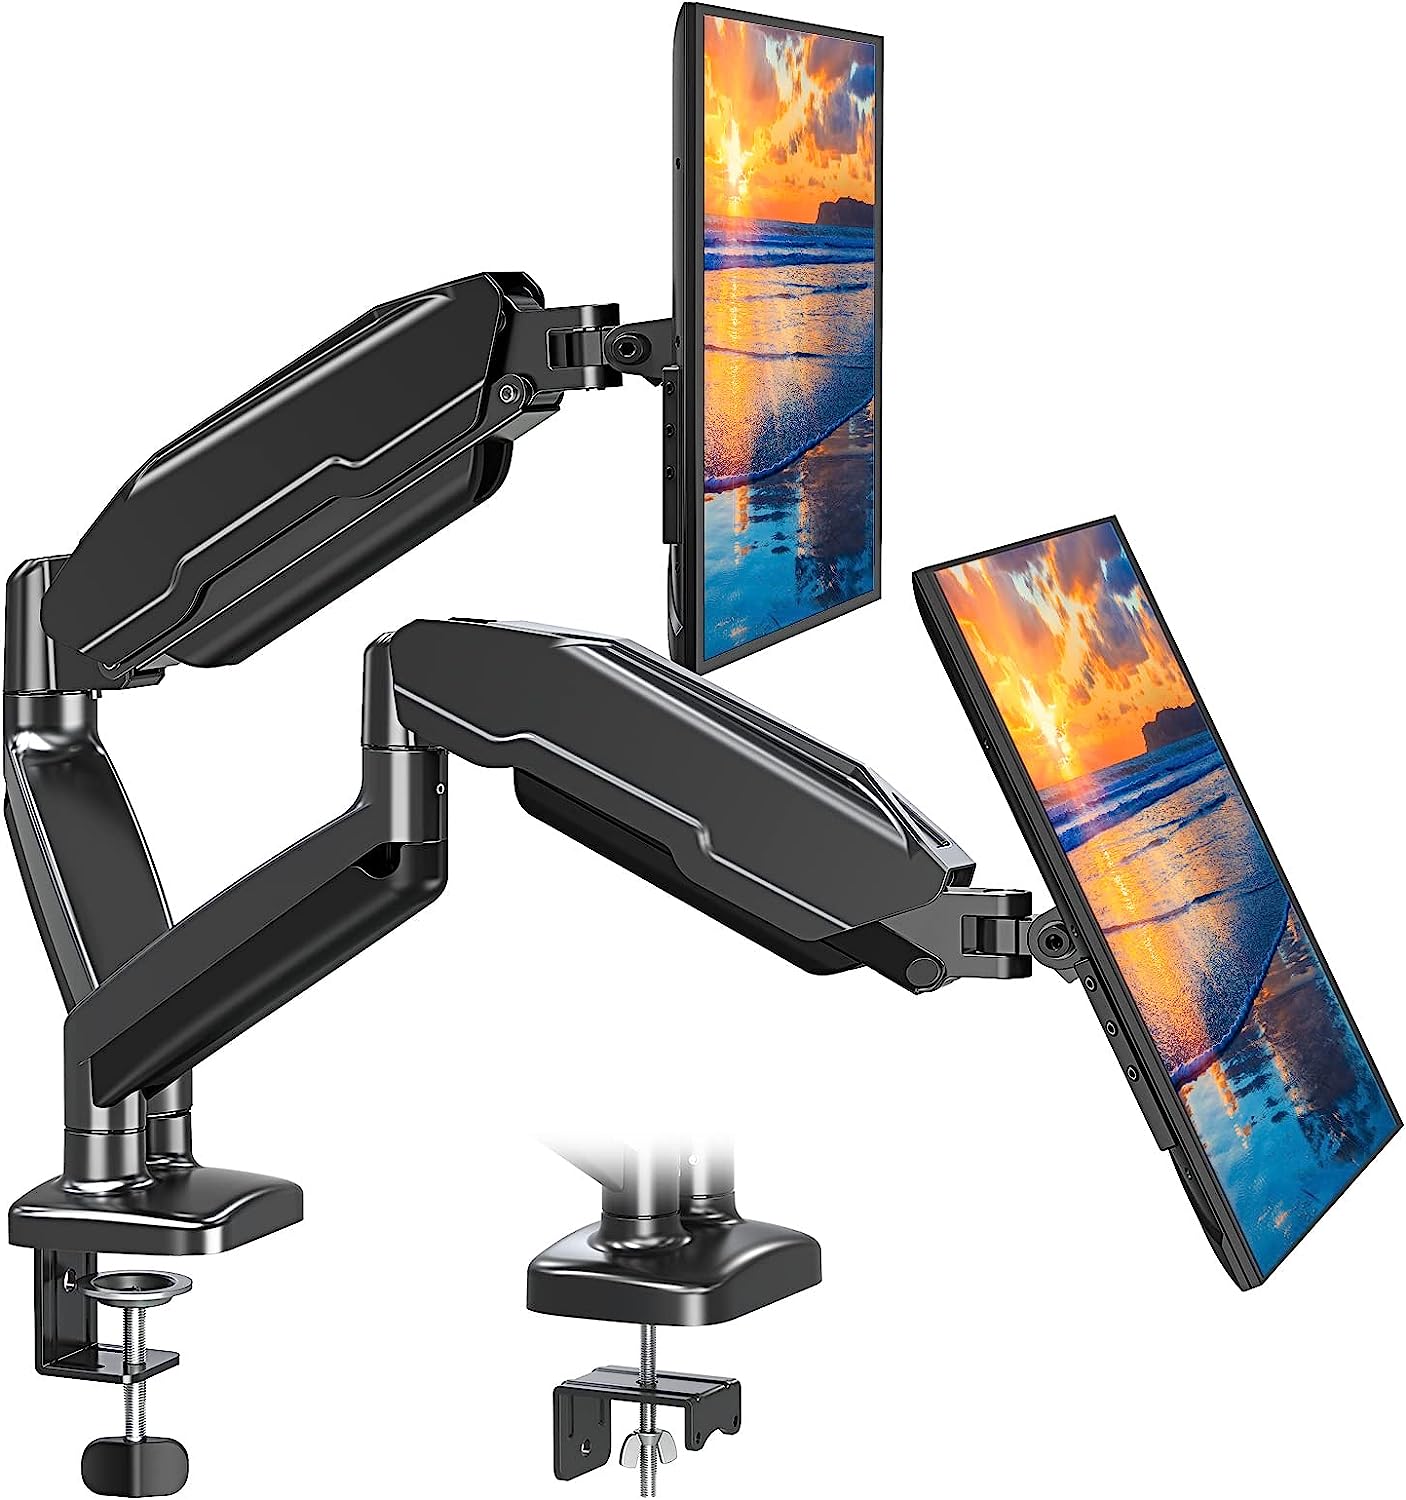 2 monitor mount detailed review